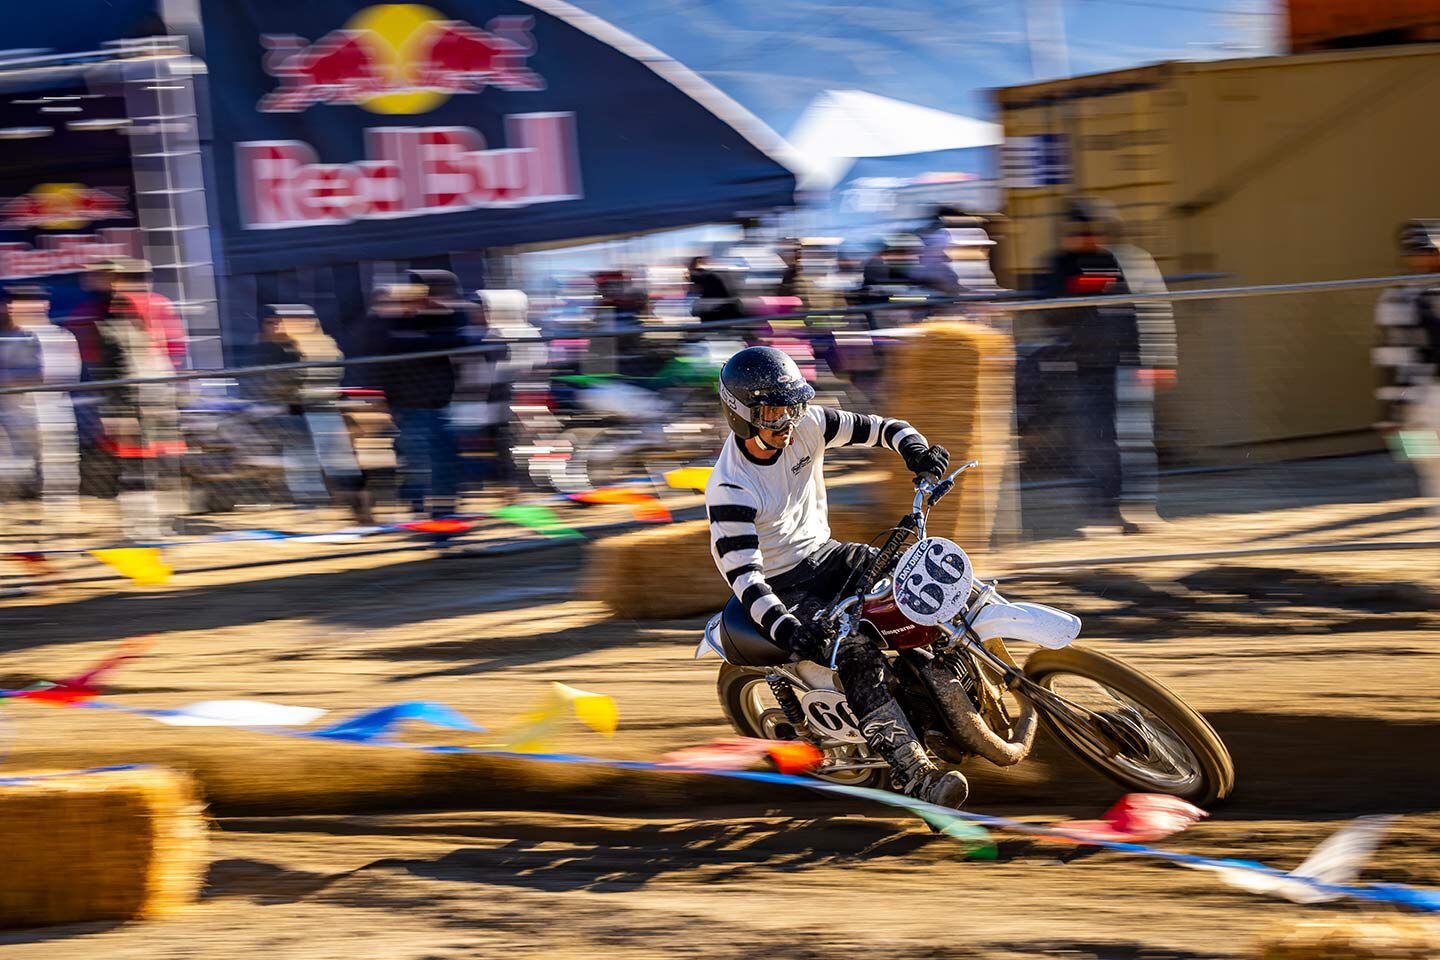 The Day in the Dirt grand prix is a run-what-ya-brung style competition with classes for virtually any type of off-road motorcycle.